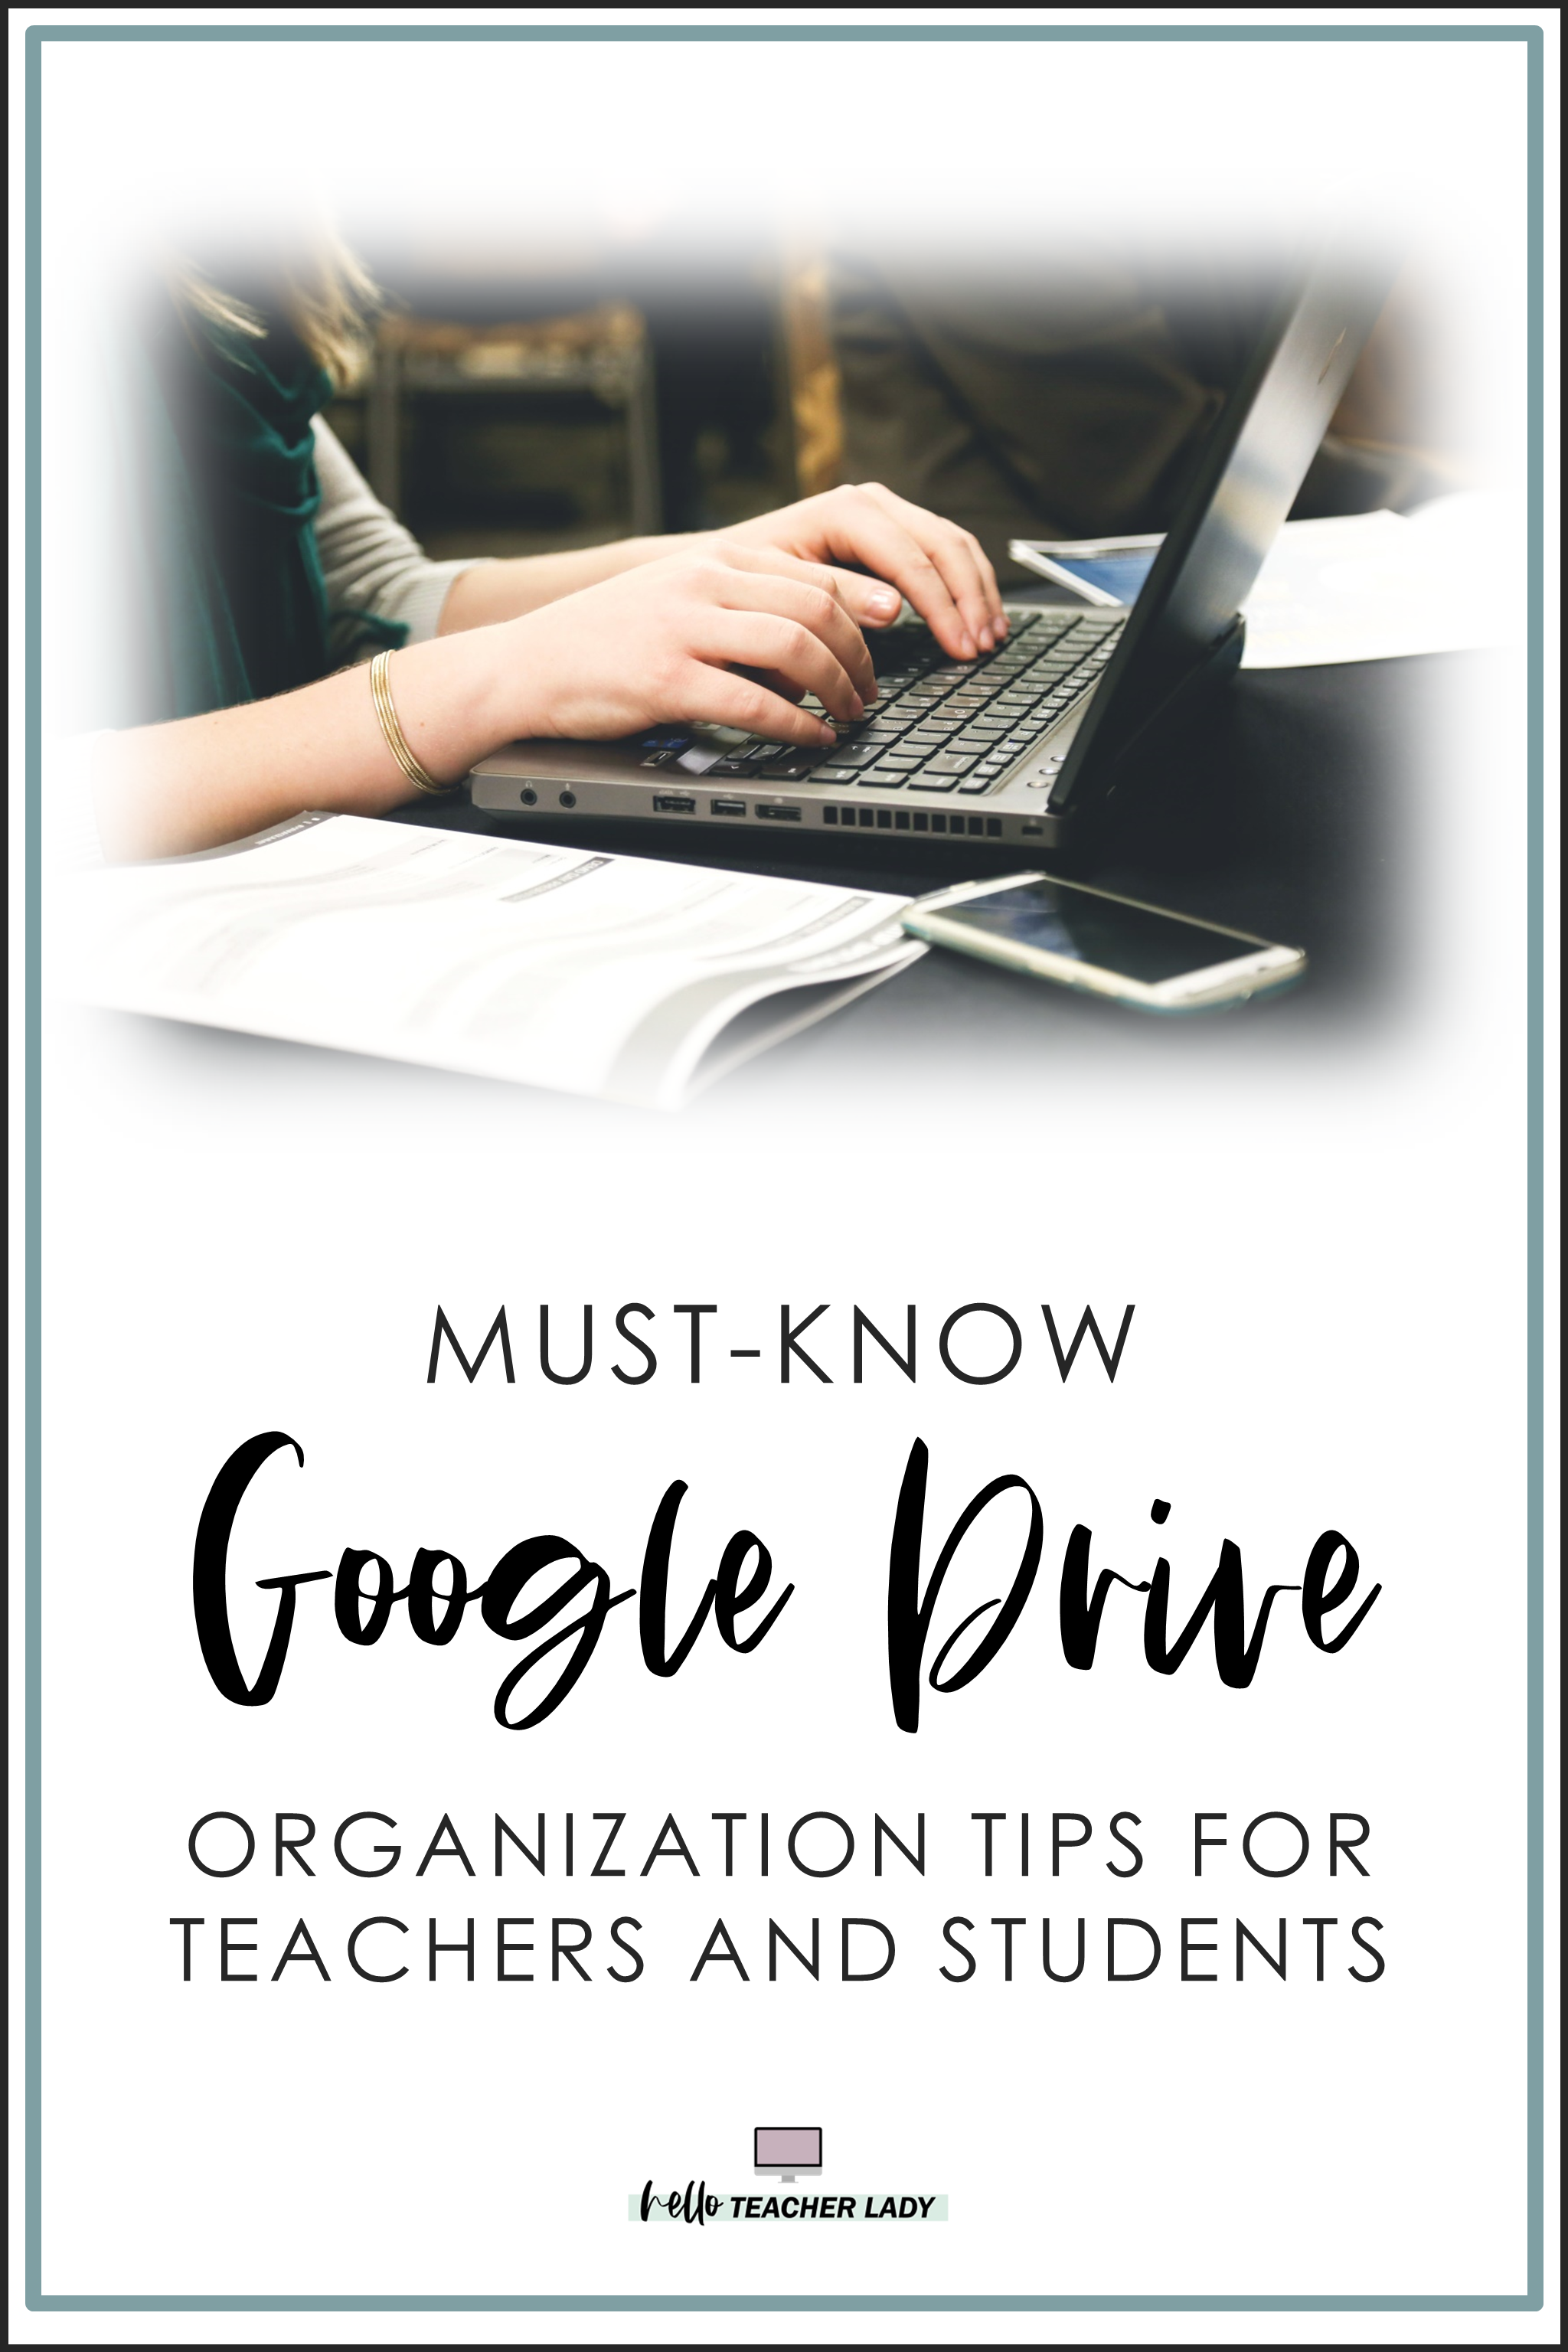 TCEA Responds: Organizing Google Drive for Others • TechNotes Blog